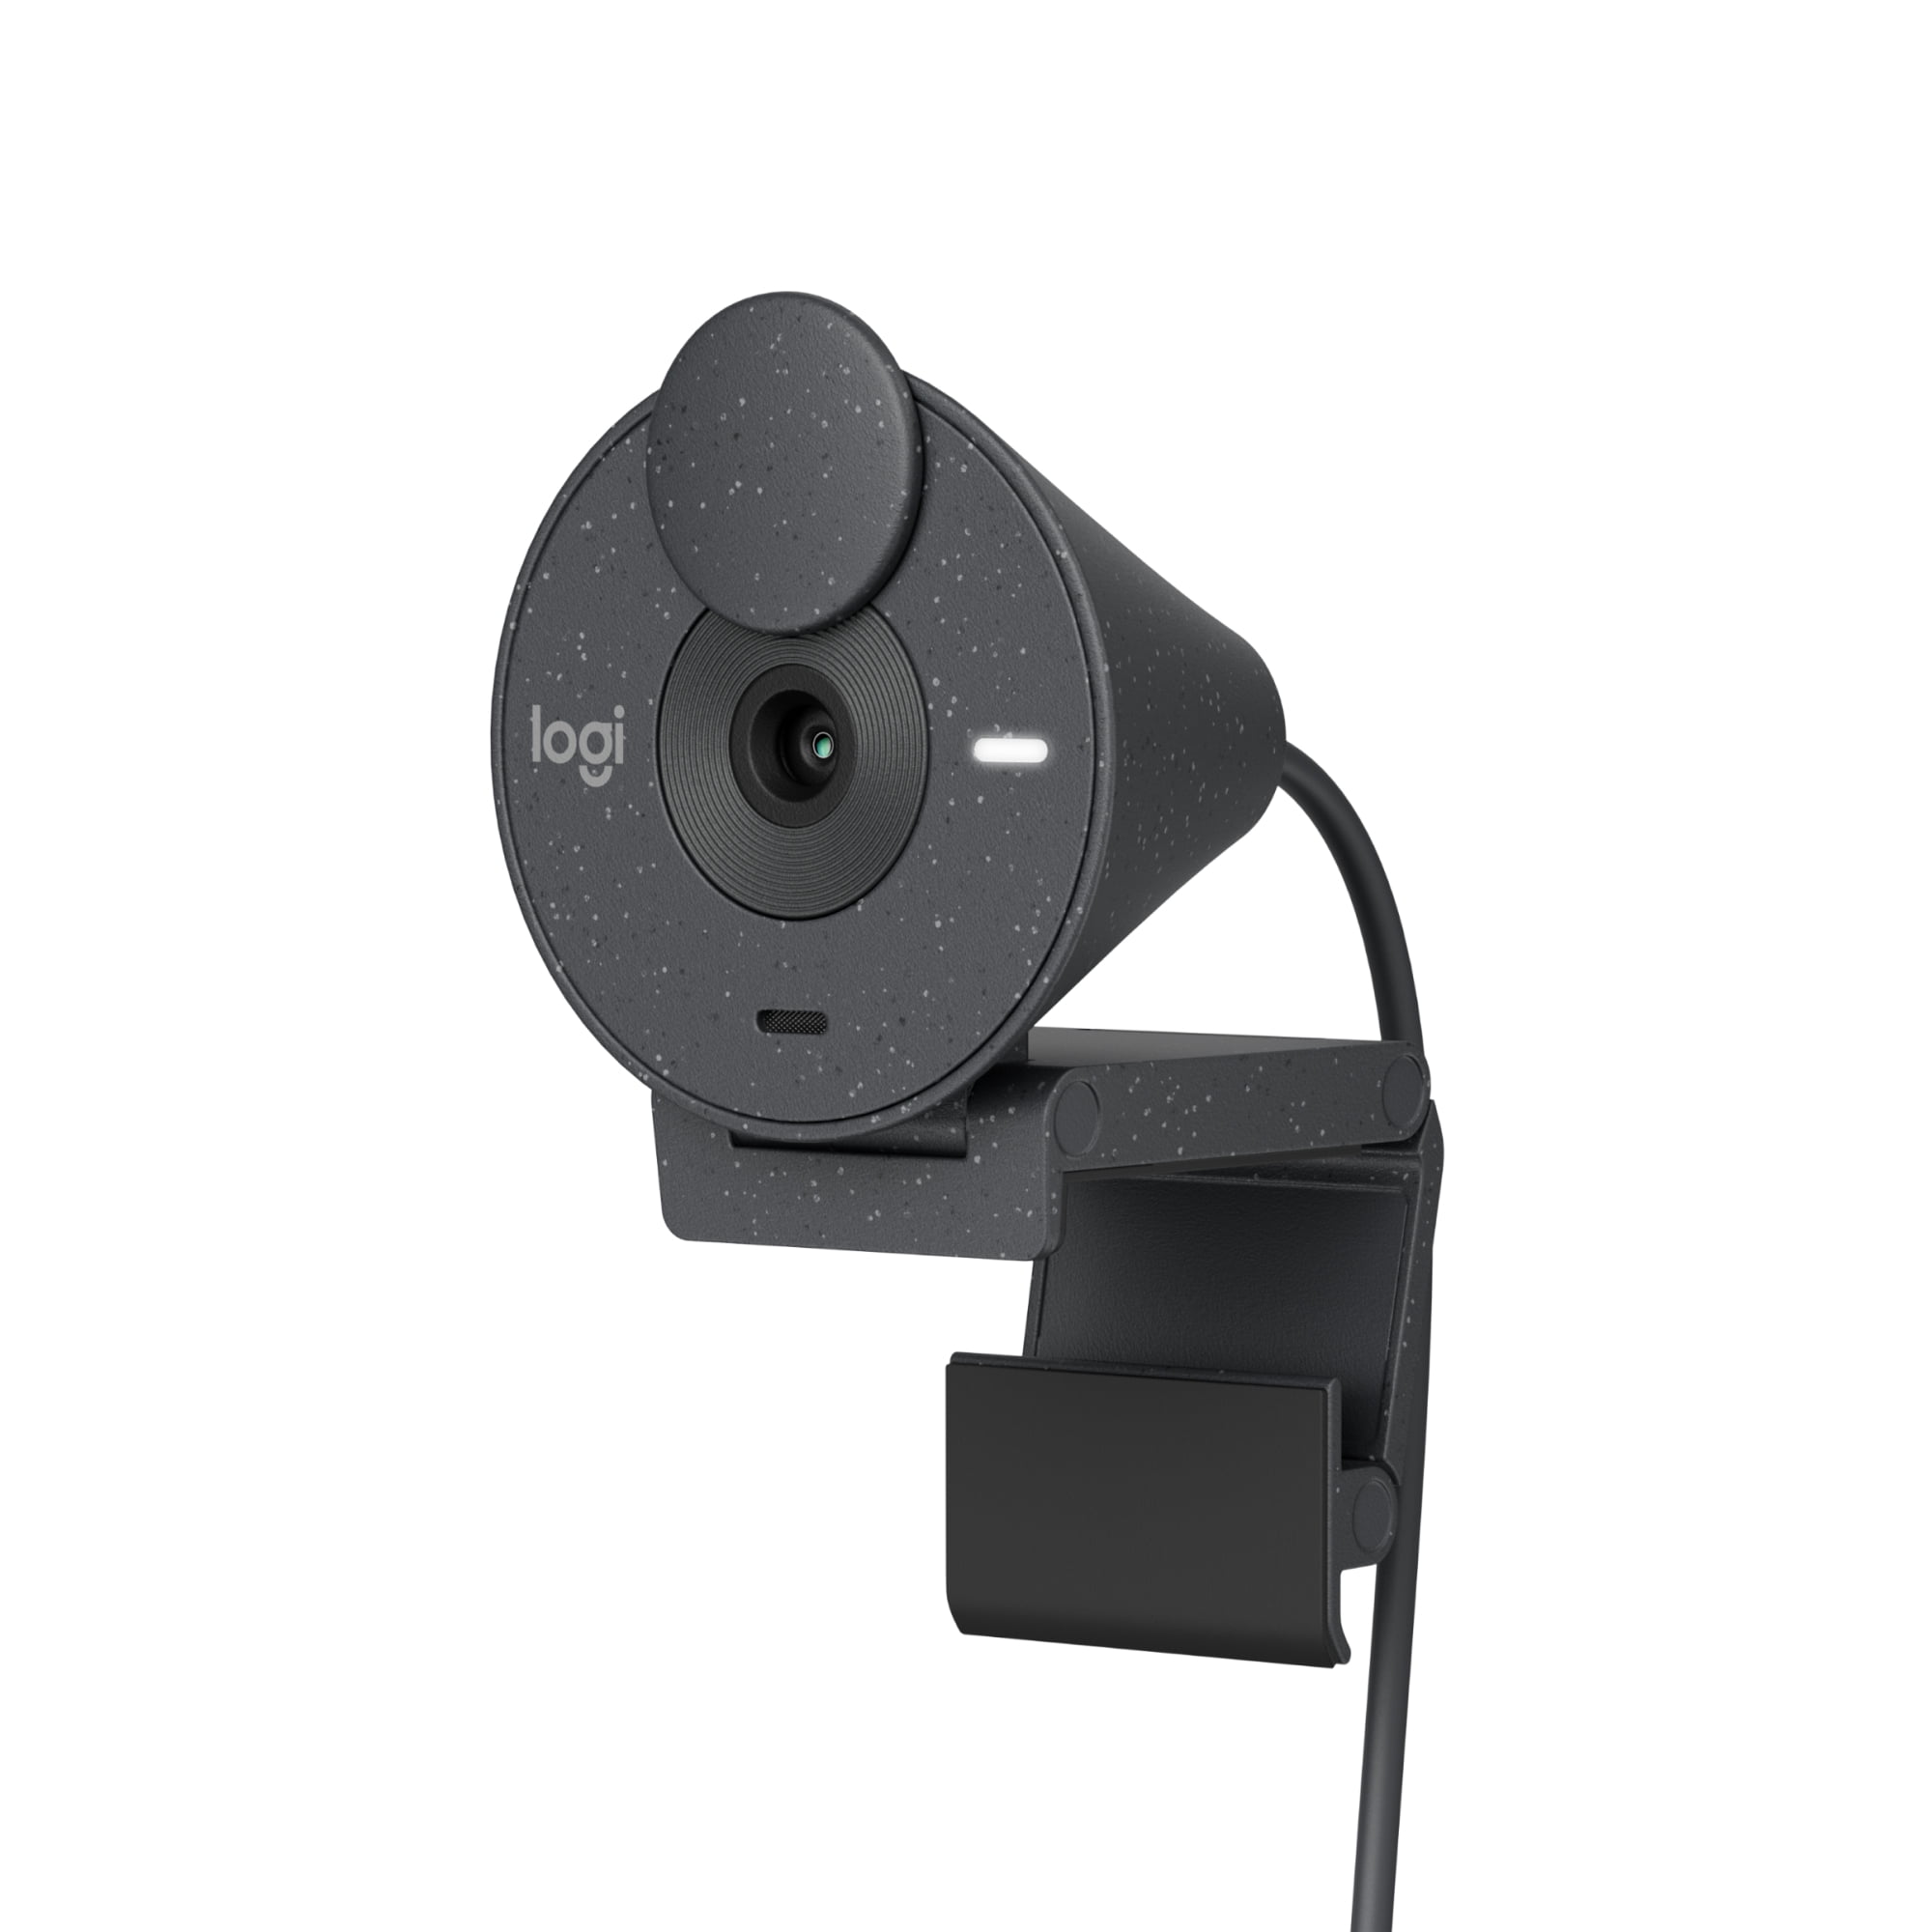  Logitech C920S HD Pro Webcam with Privacy Shutter - Widescreen  Video Calling and Recording, 1080p Streaming Camera, Desktop or Laptop  Webcam : Electronics